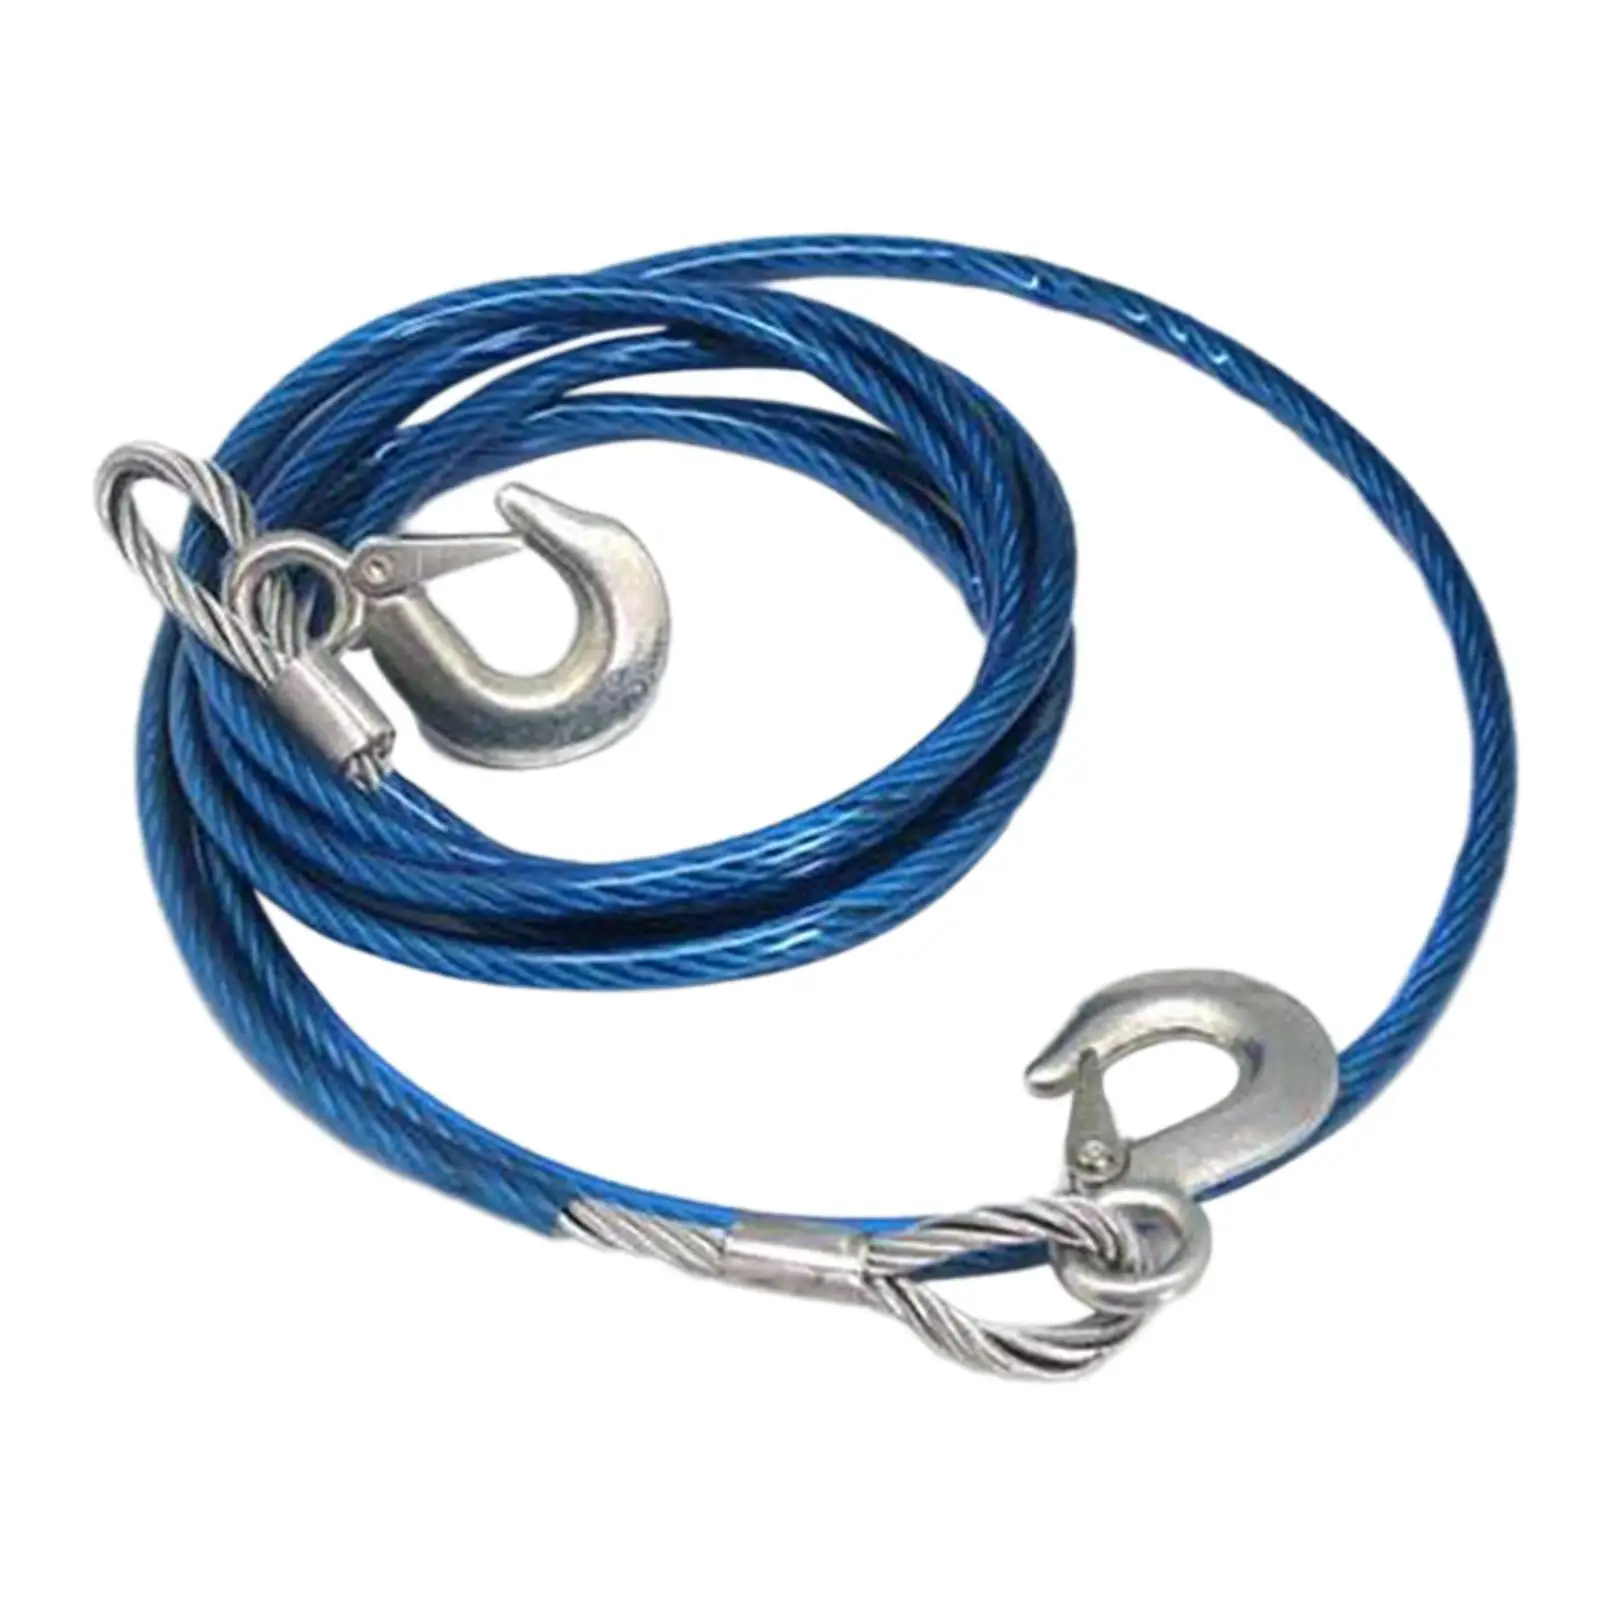 Trailer Rope Anti Slip Tow Rope for Vehicle Recovery Hauling Towing